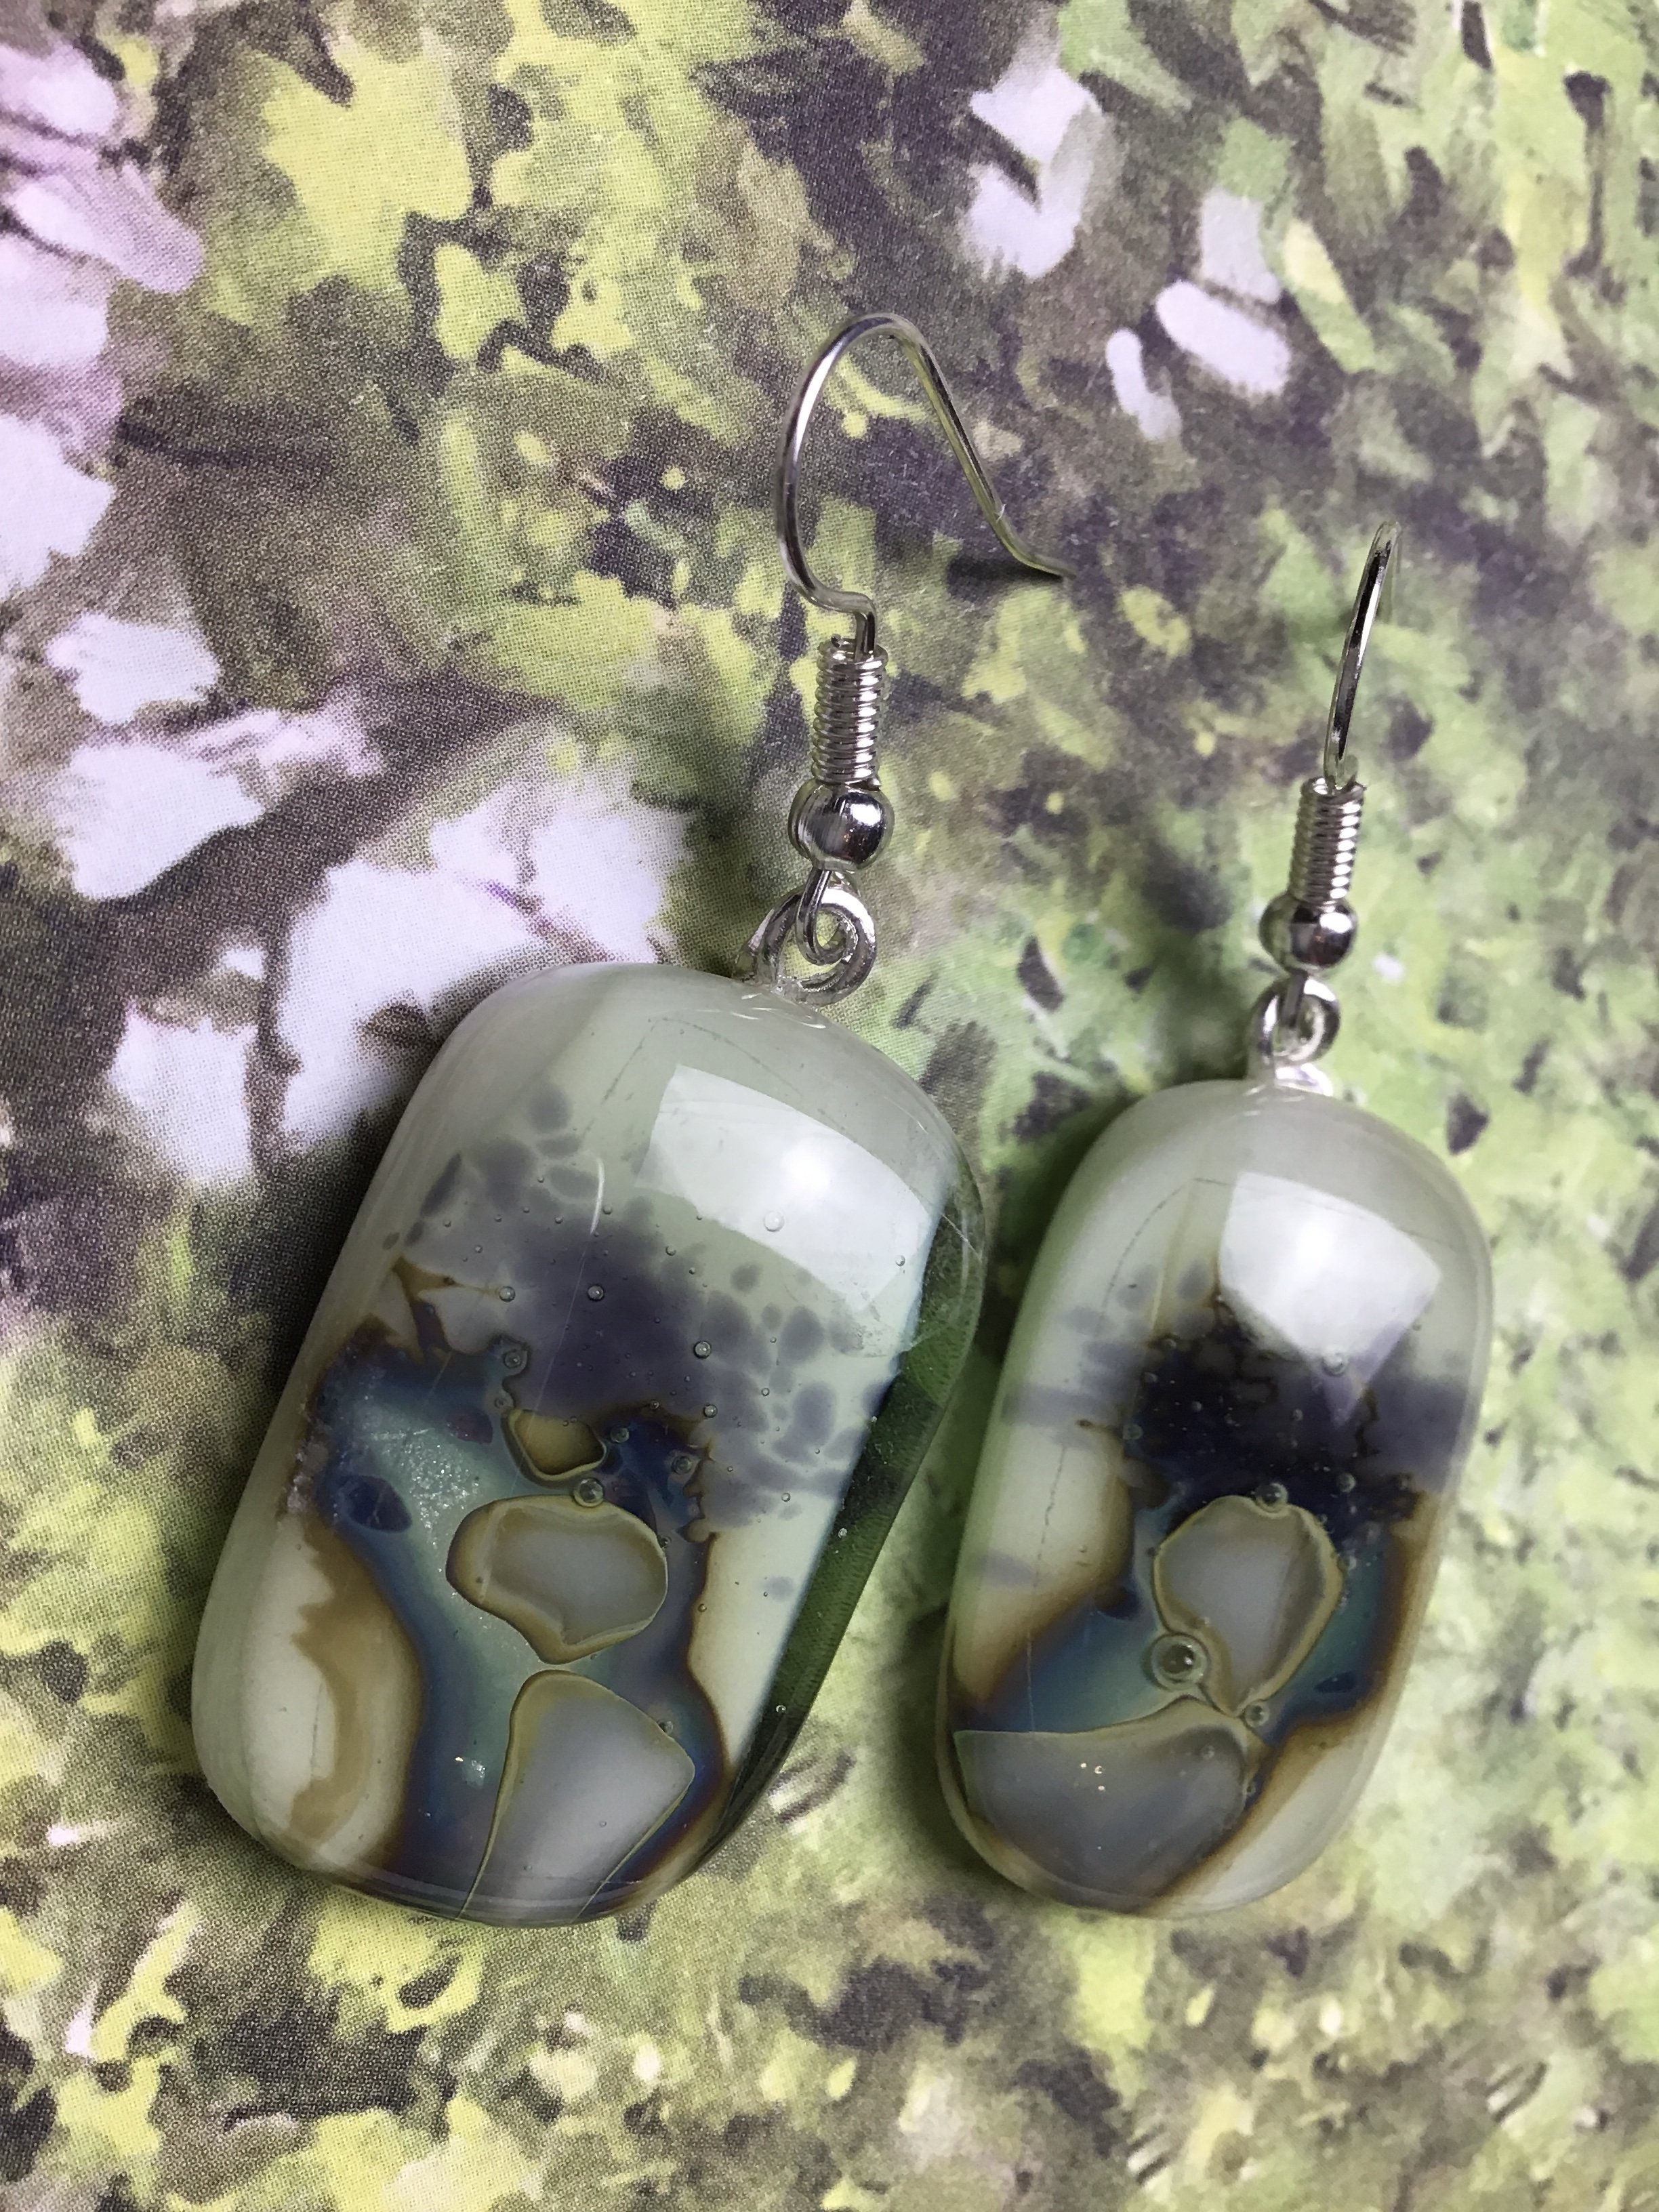 Fused glass jewellery and decorative objects